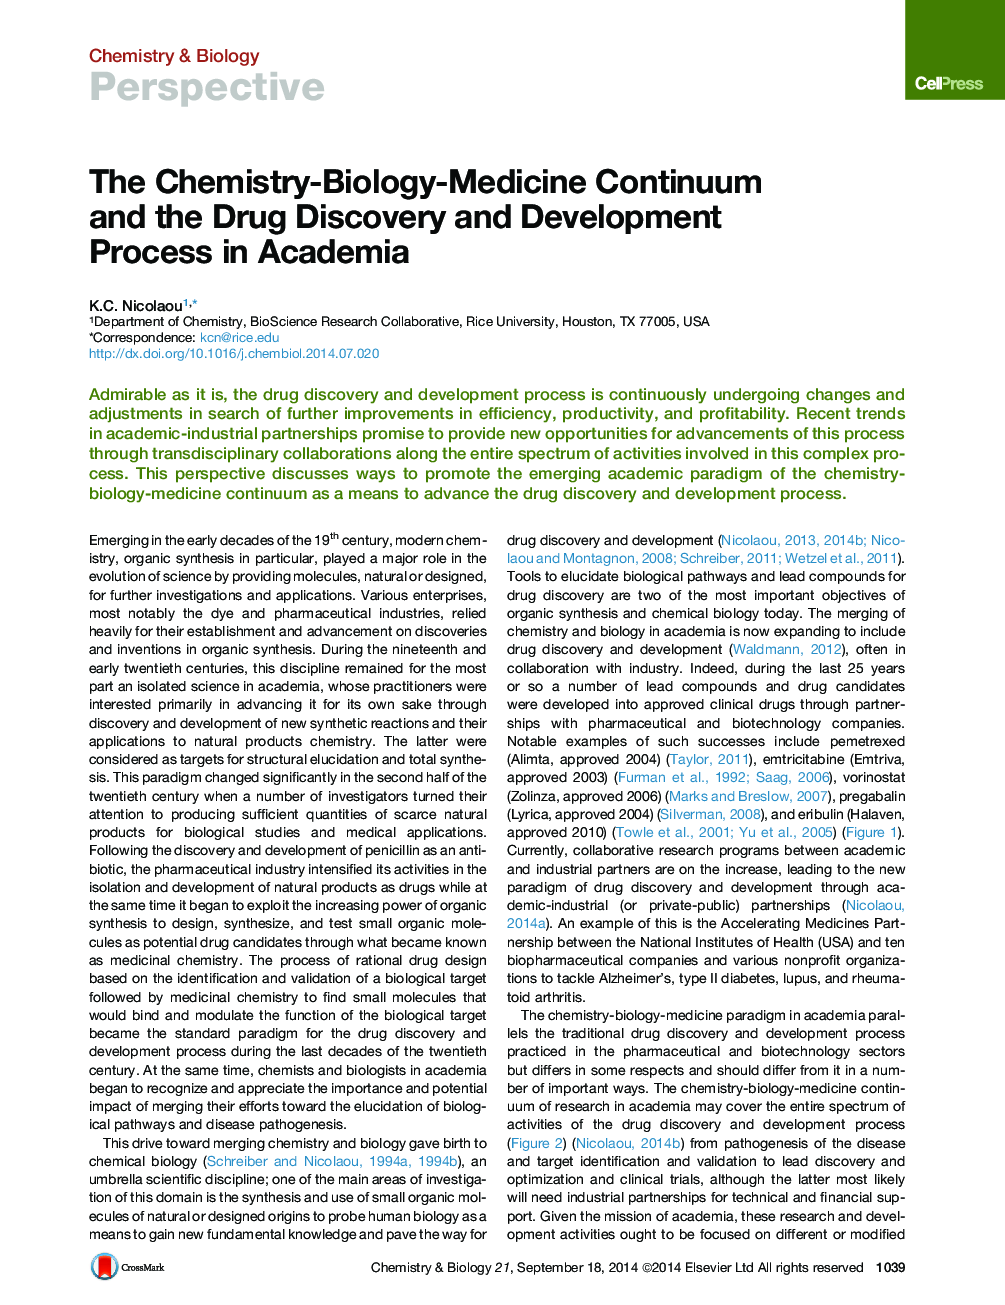 The Chemistry-Biology-Medicine Continuum and the Drug Discovery and Development Process in Academia